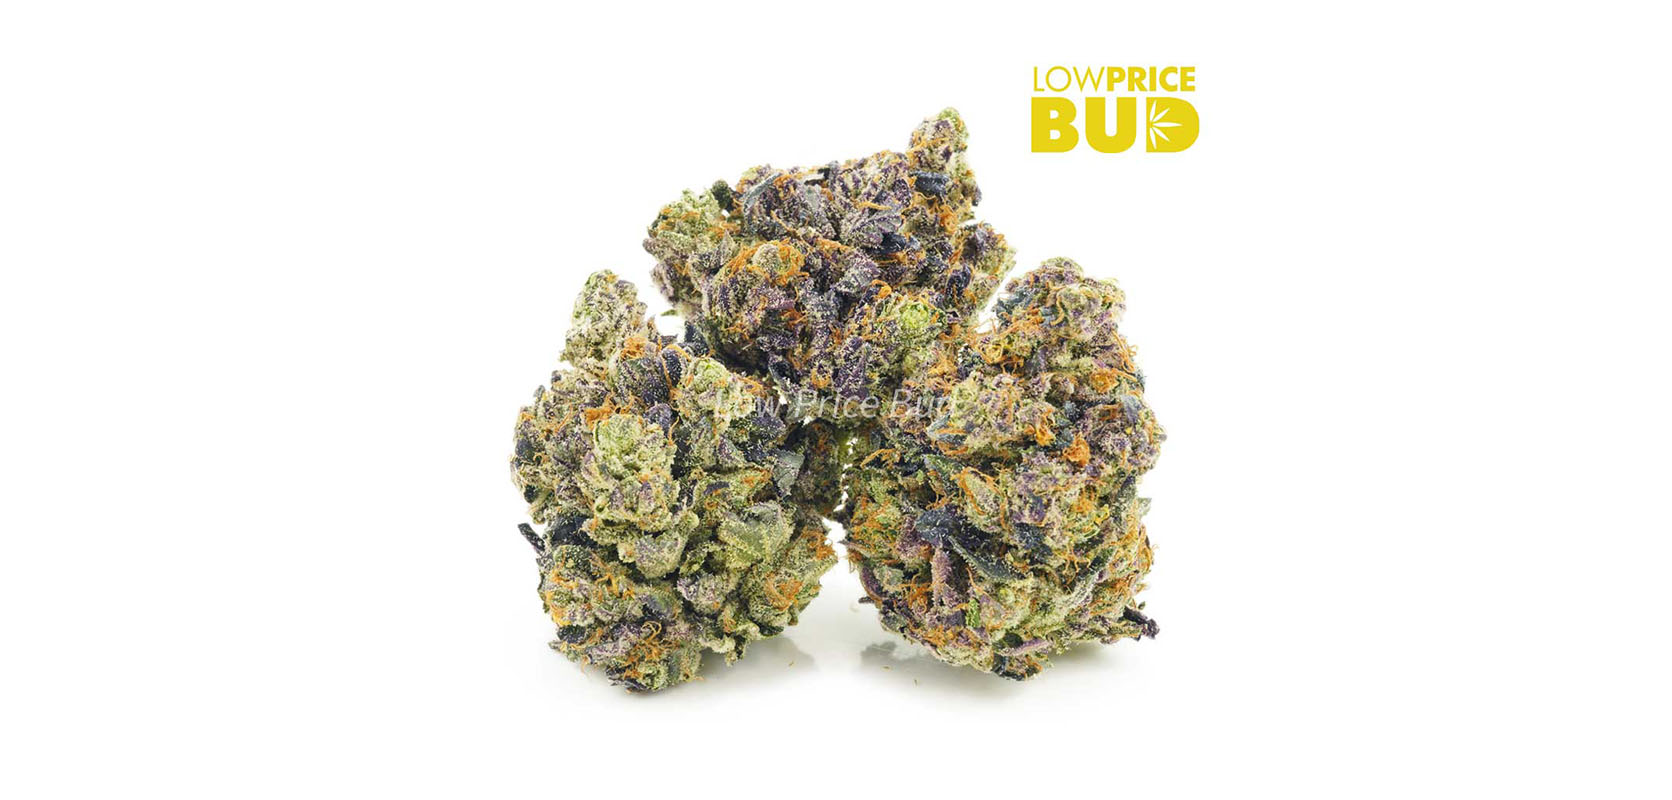 photo of death punch strain weed for sale. buy cheap bud online in canada from low price bud